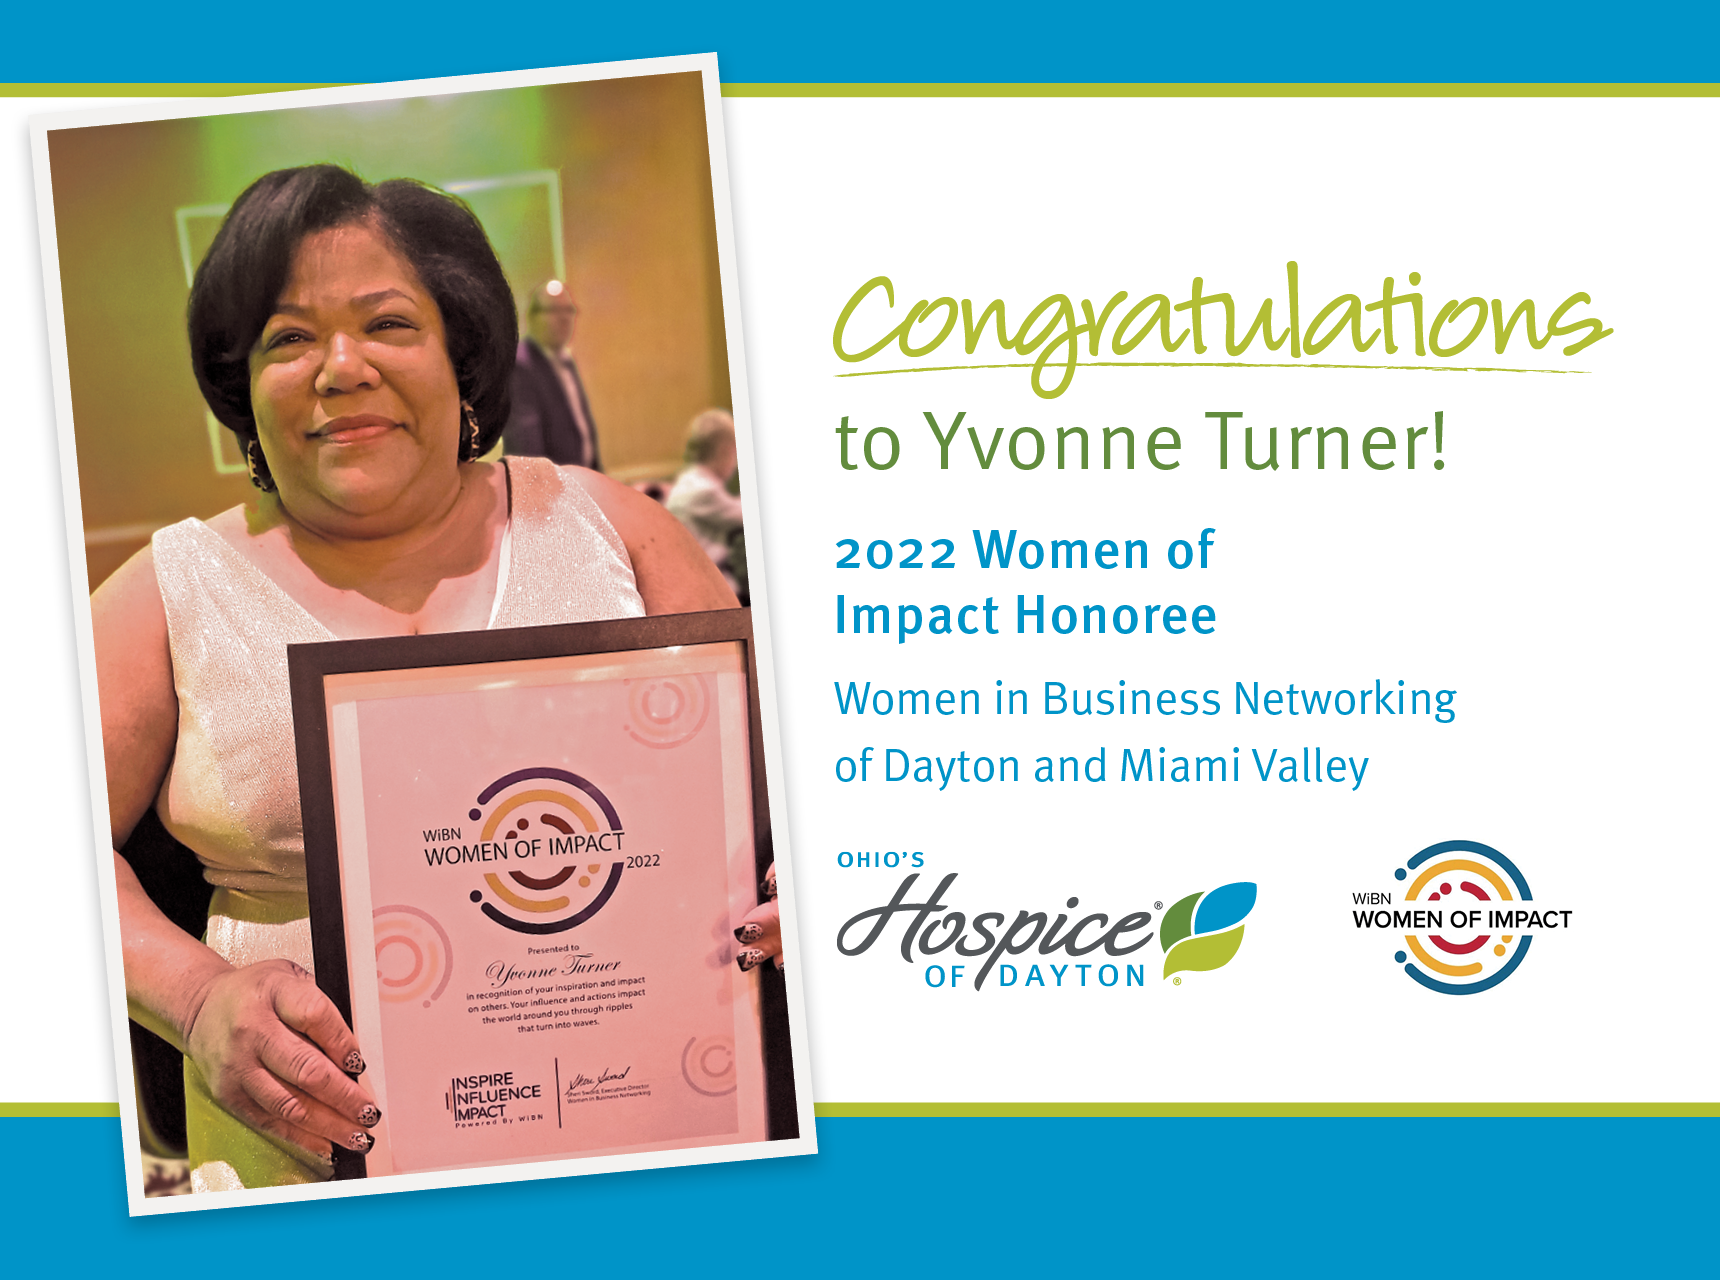 Congratulations to Yvonne Turner: 2022 Women of Impact Honoree - Women in Business Networking of Dayton and Miami Valley